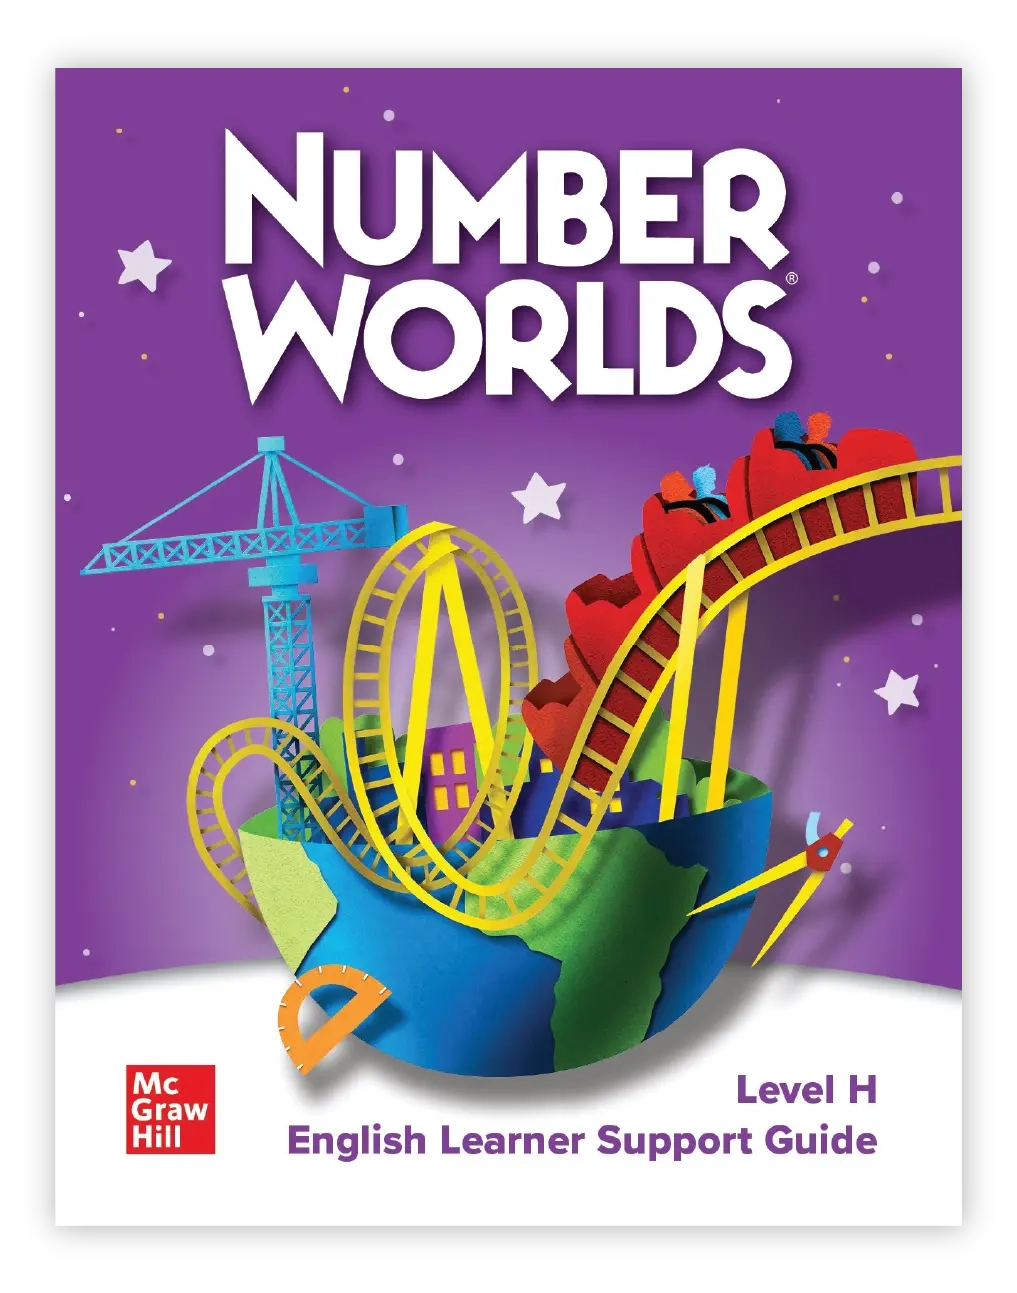 Number Worlds English Learner Support Guide, Level H cover